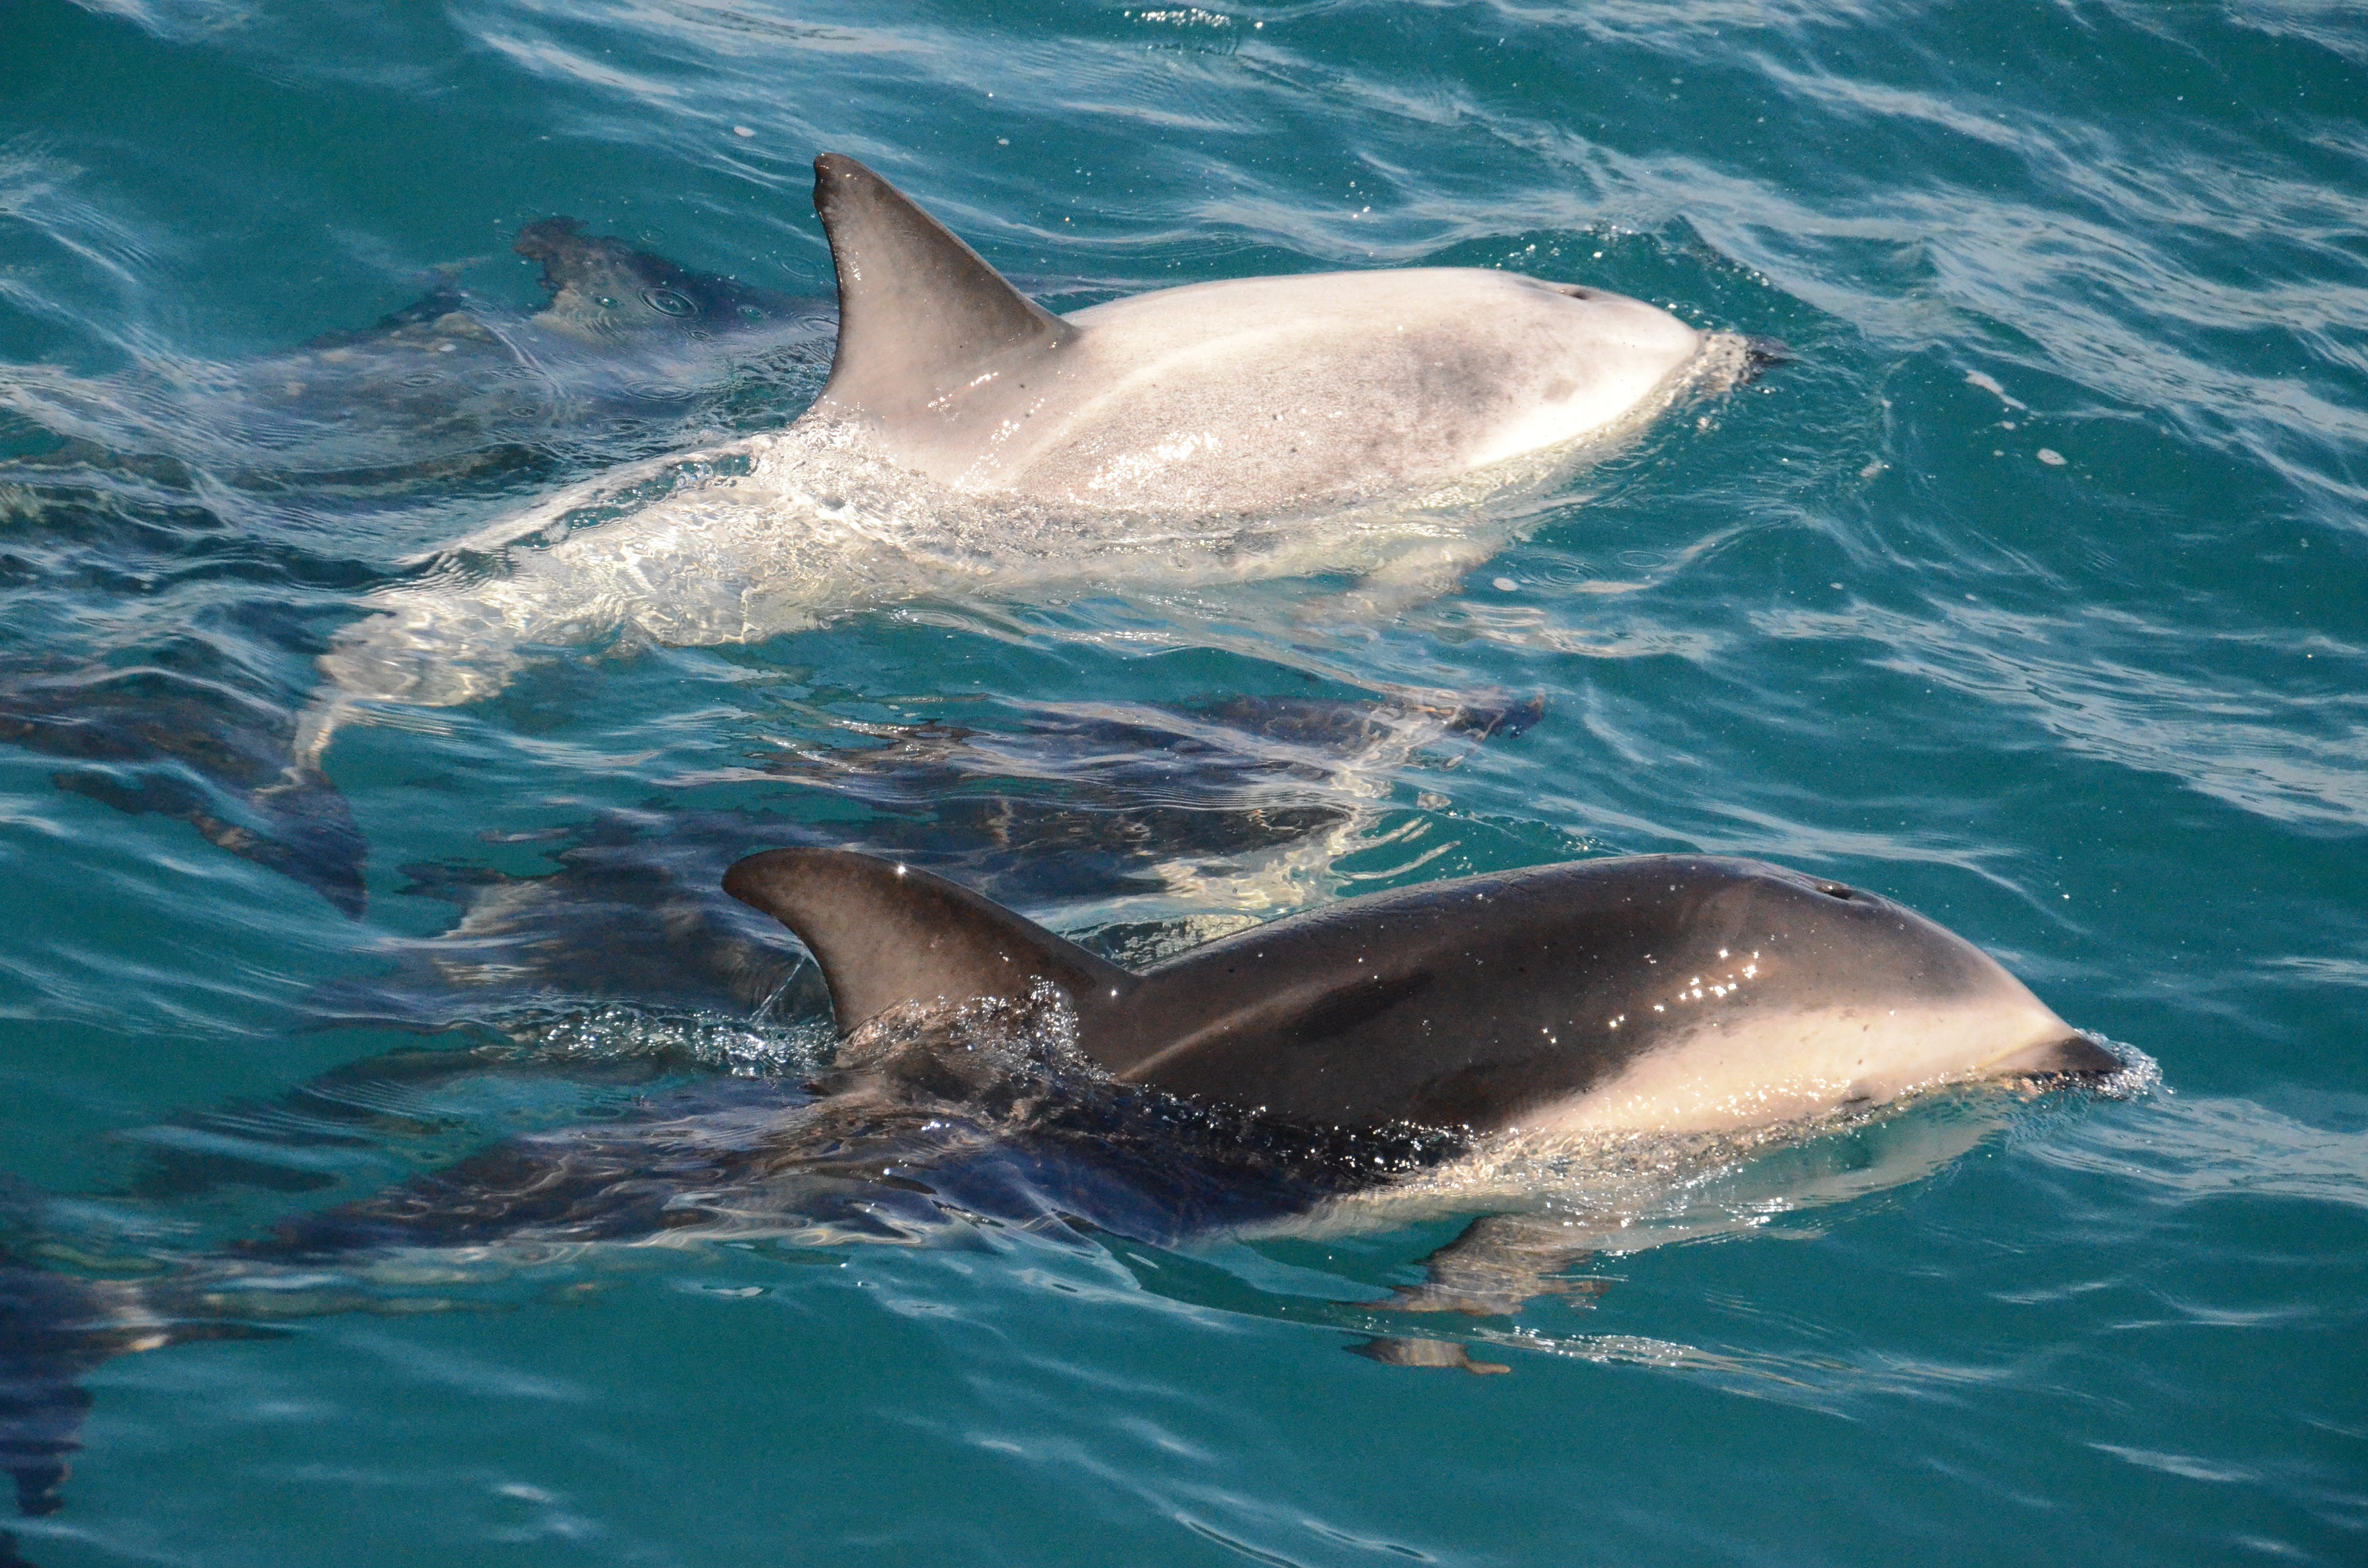 Photo of dusky dolphins seen in Kaikoura, NZ. Photo by Brent Cahill